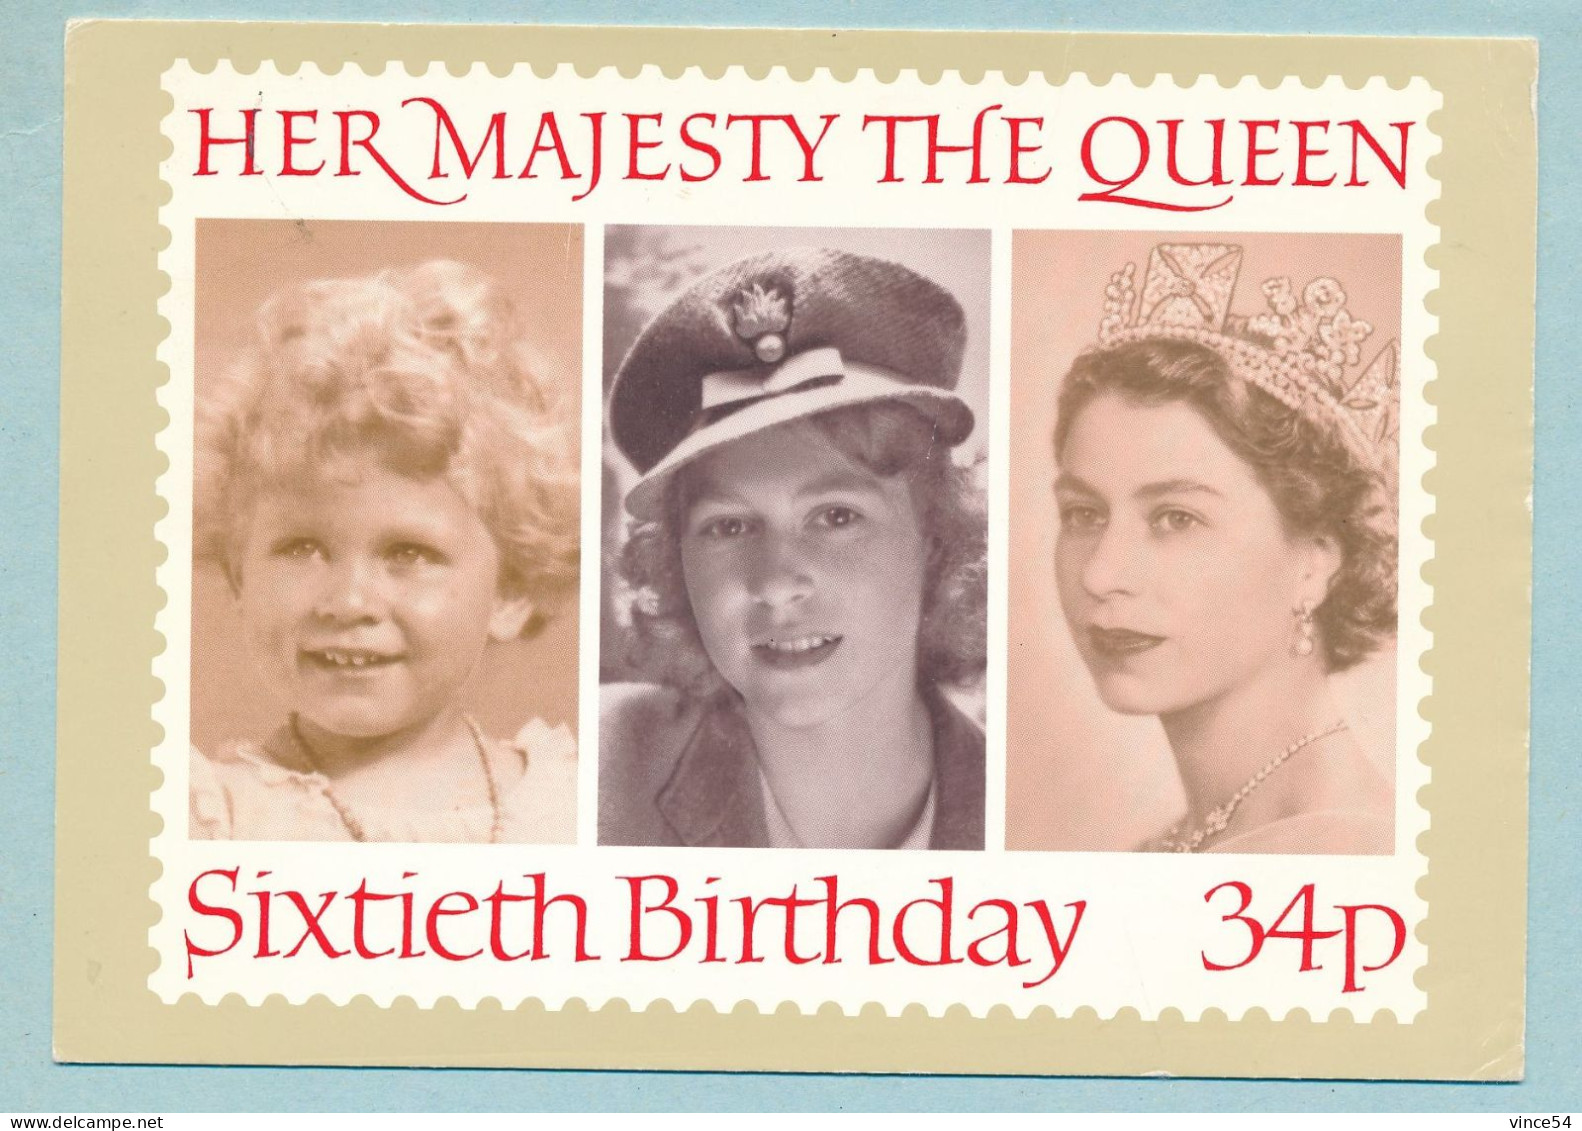 Her Majesty The Queen - Sixtieth Birthday - Portraits From 1828, 1942 & 1952 - Reproduced From A Stamp - Königshäuser